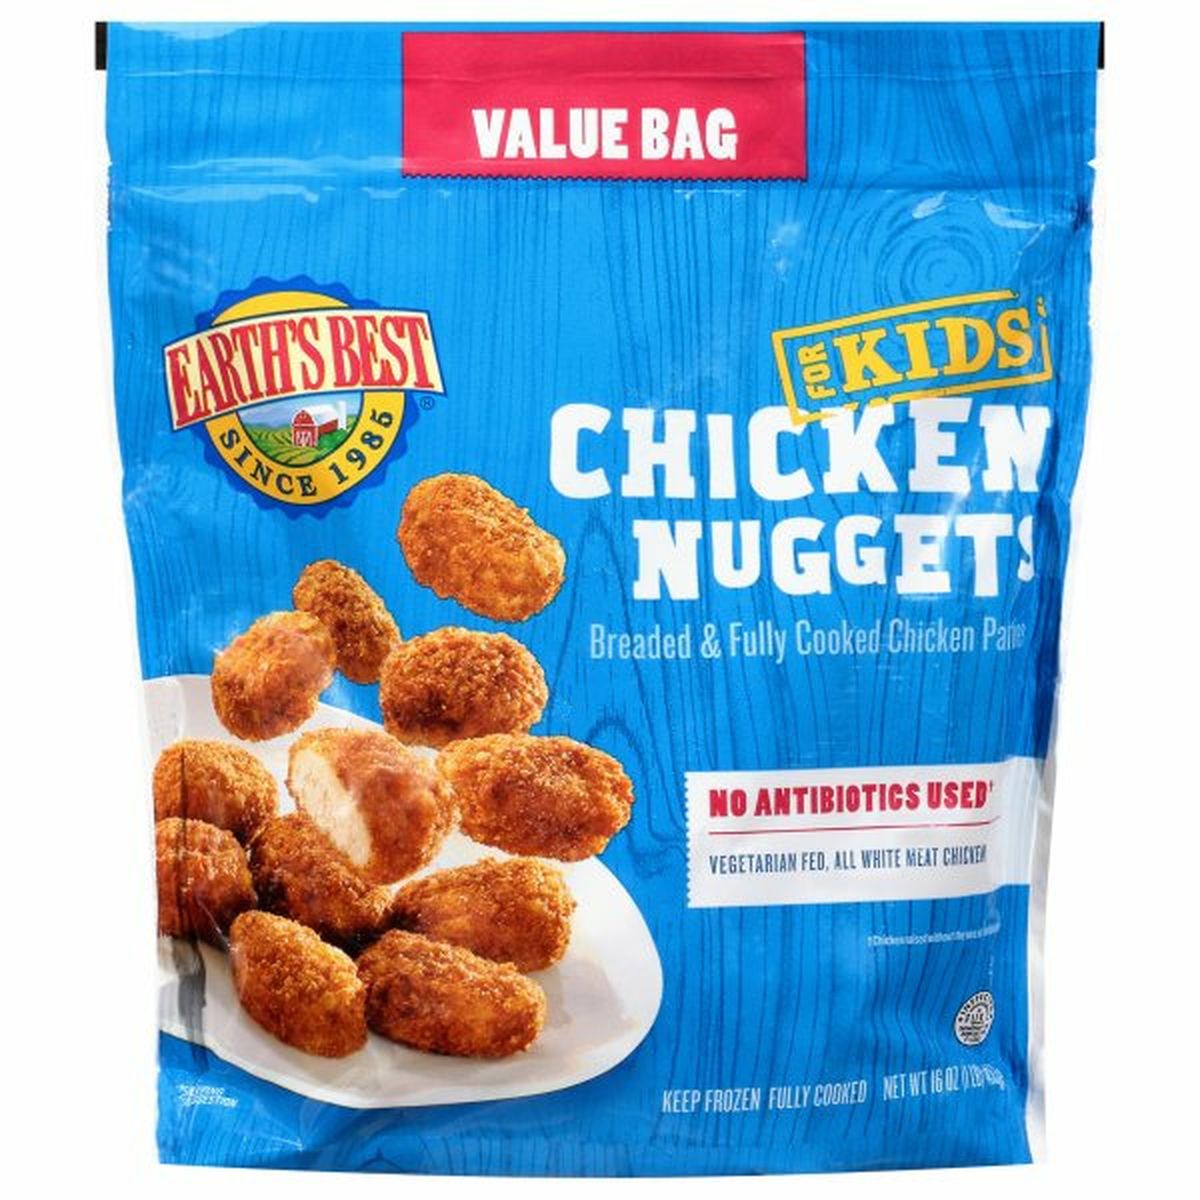 Calories in Earth's Best Chicken Nuggets, for Kids, Value Bag